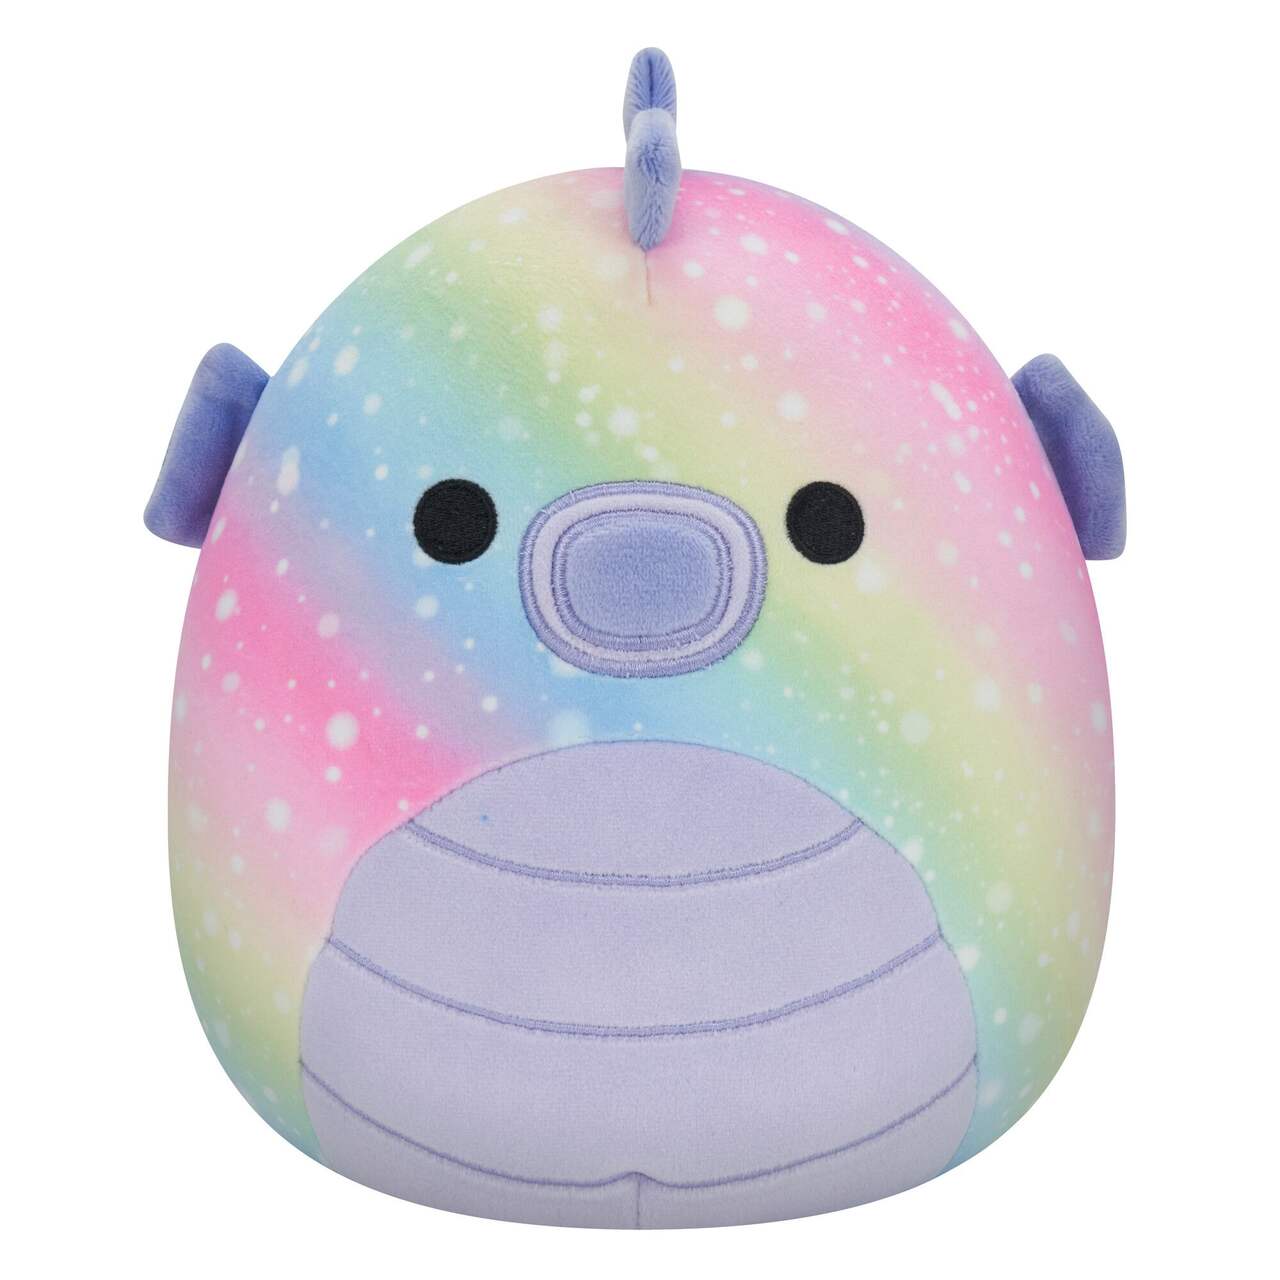 Squishmallow Plush Toy, Assorted, 8-in, Age 2+